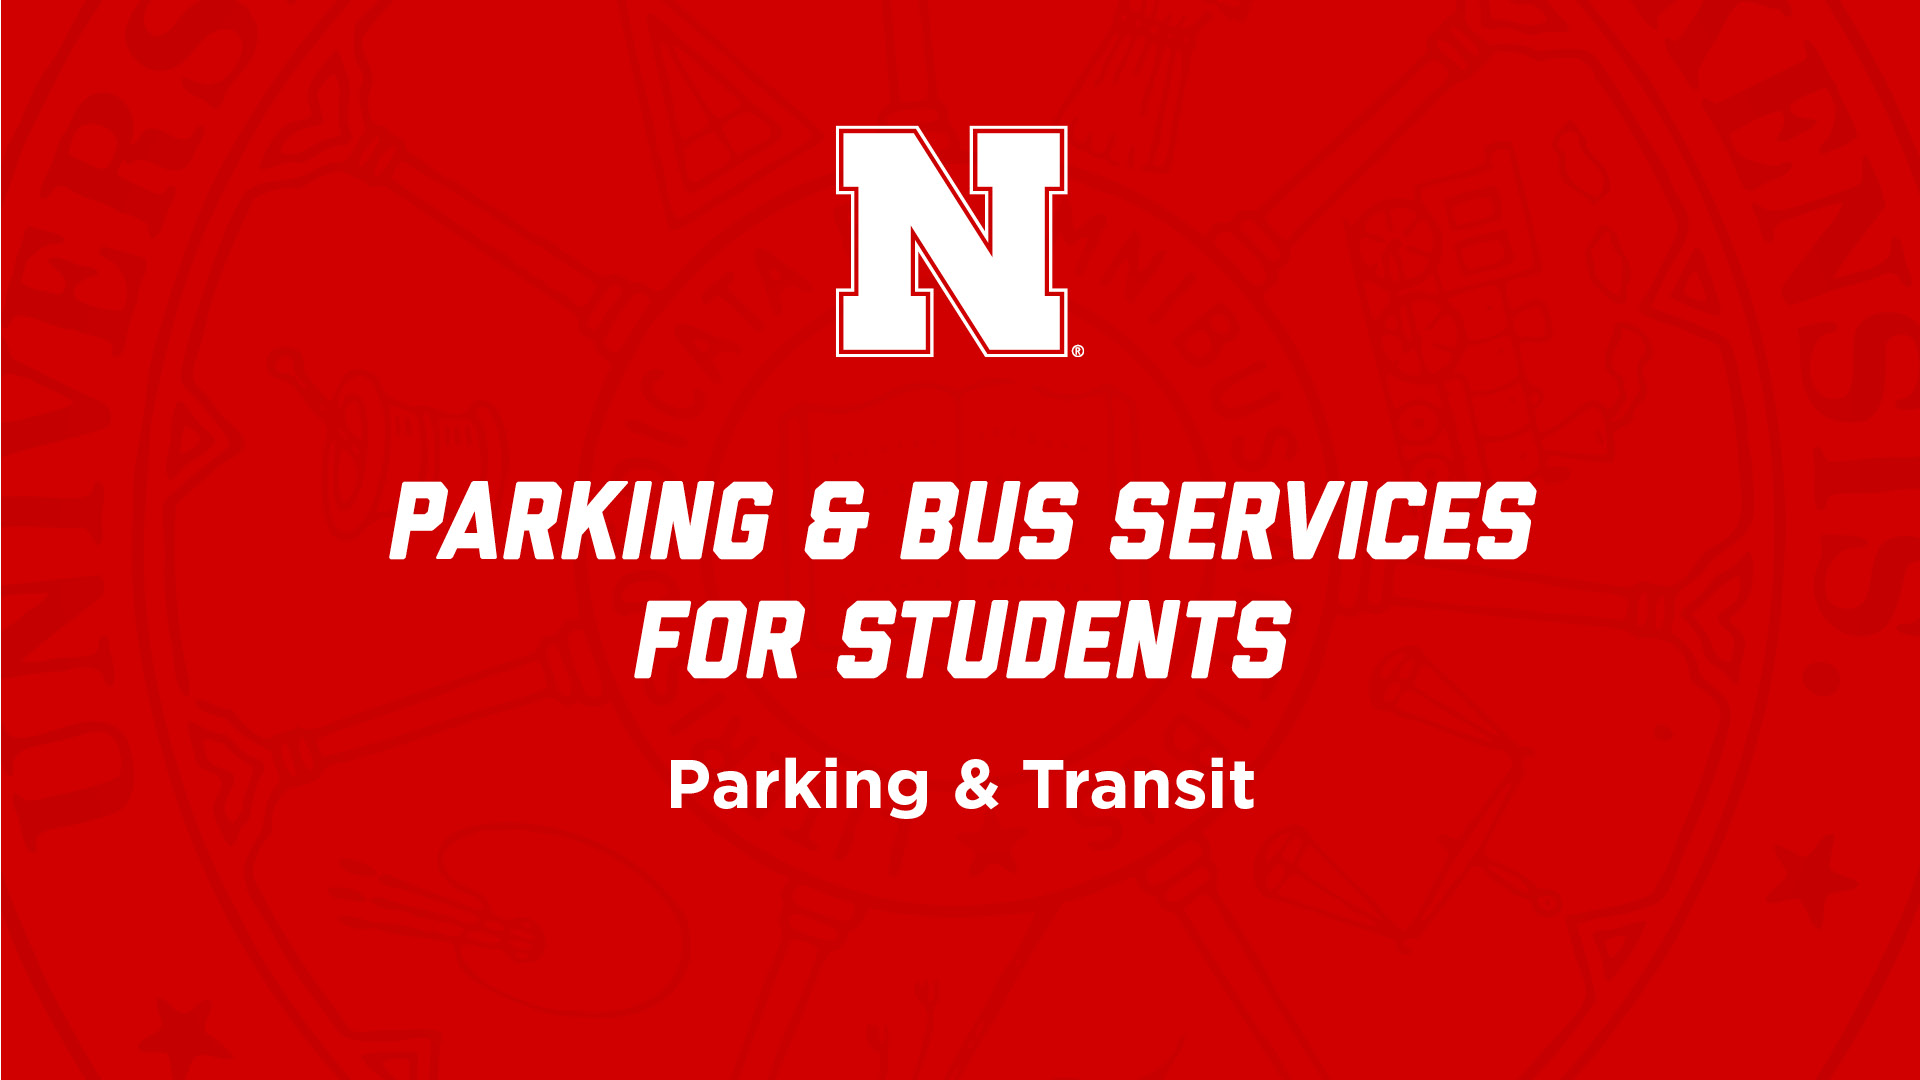 Parking & Bus Services for Students NSE Presentation